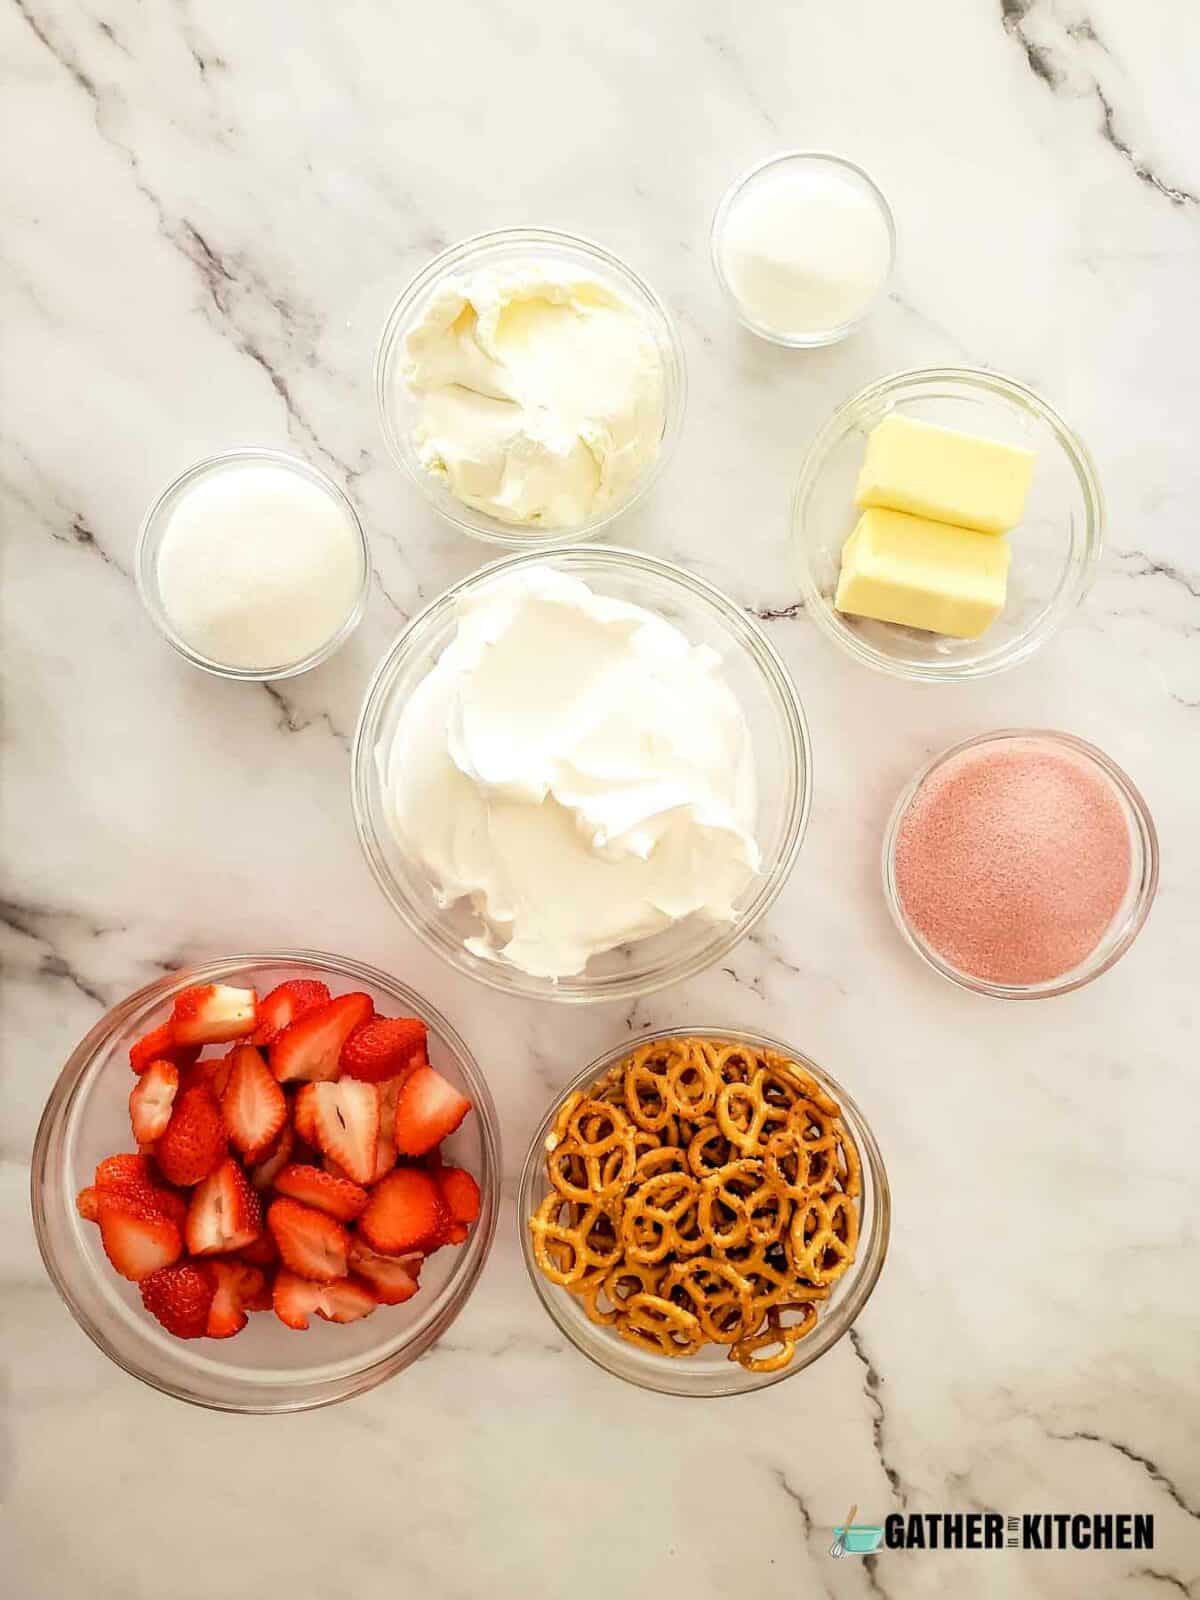 Ingredients for making strawberry pretzel salad: salted pretzels, cut strawberries, sugar, butter, cream cheese, Cool Whip, and contents of a strawberry Jello packet.